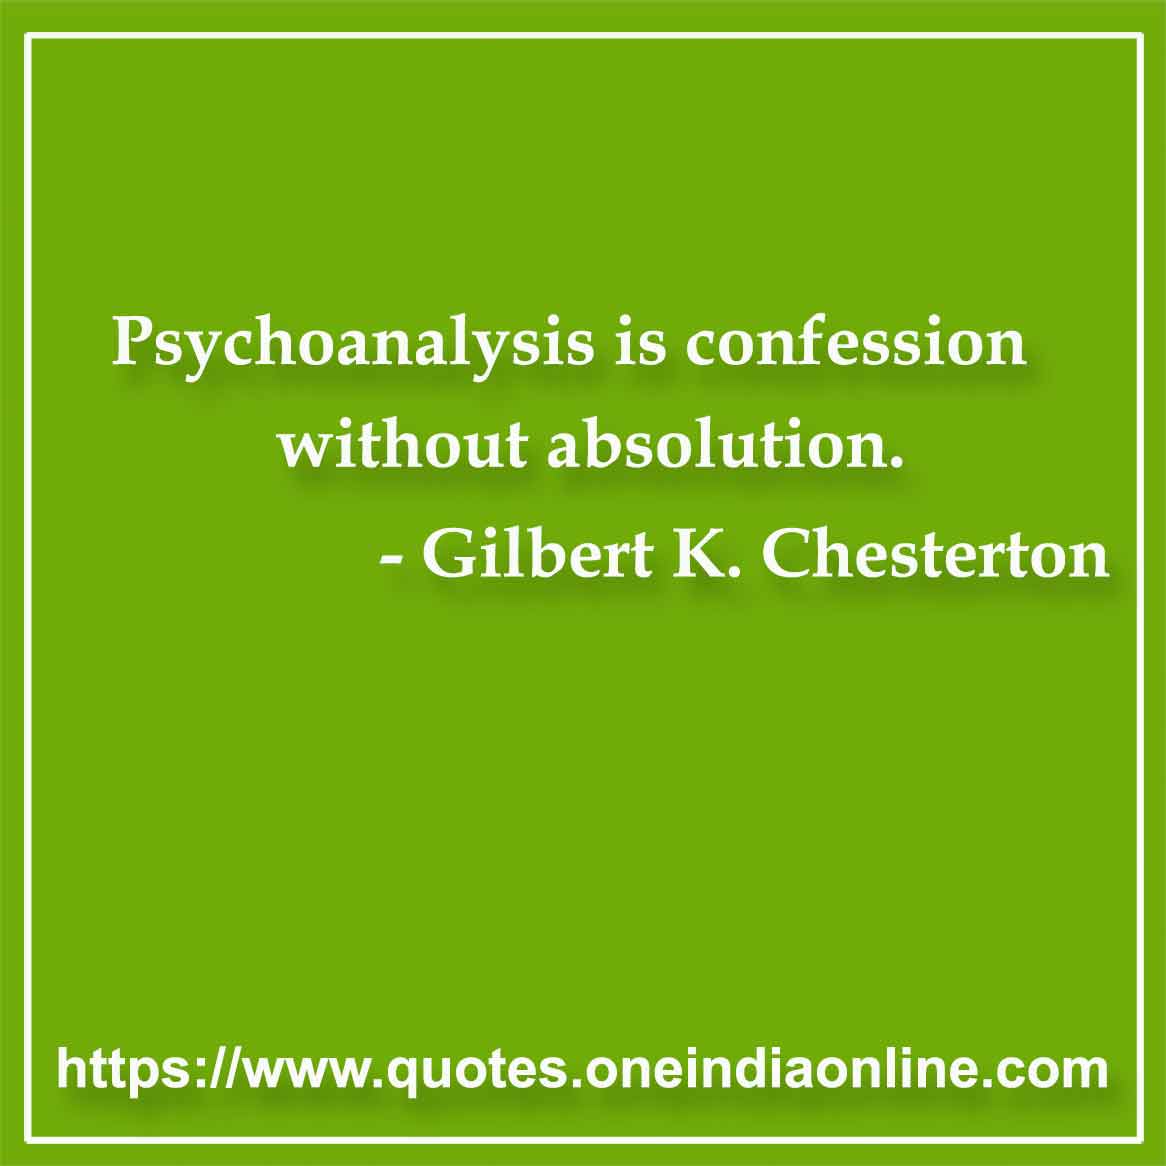 Psychoanalysis is confession without absolution.

- Analysis Quote by Gilbert K. Chesterton